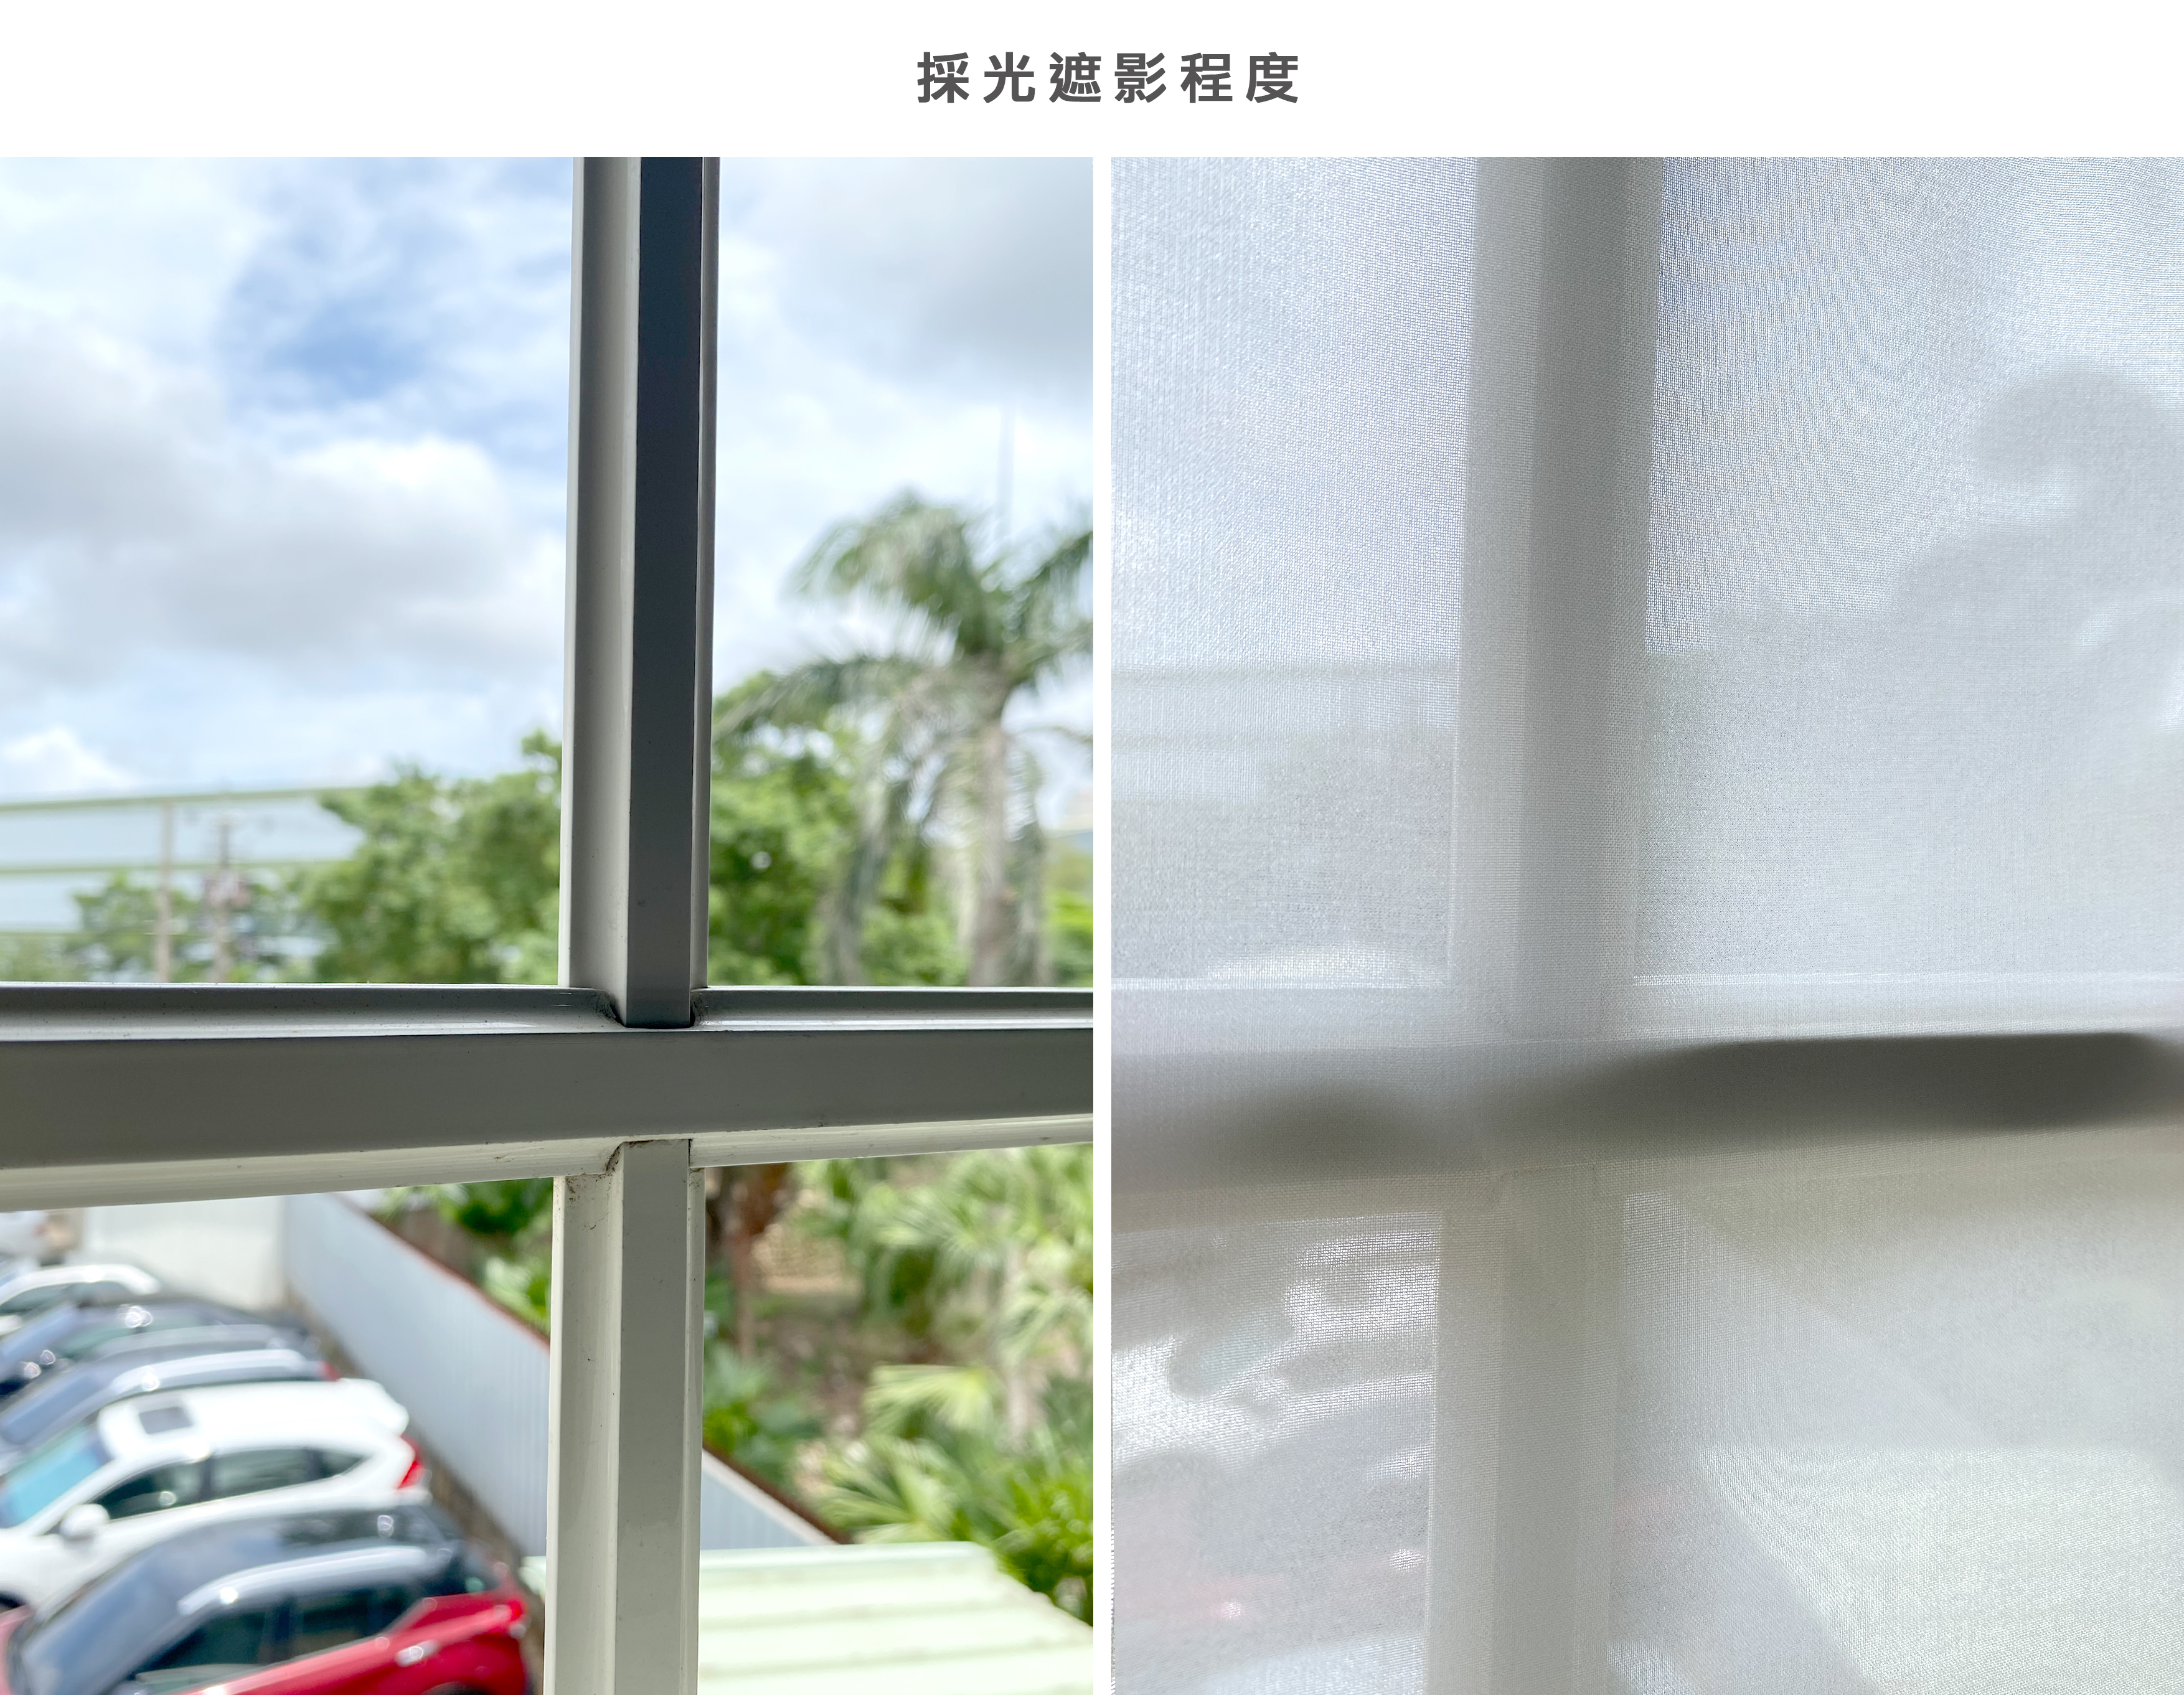 Lo-Fi House Select Curtains　Sheer Plain Sheer - Cream Child Safety／Cordless Blinds & Shades Light Filtering Blinds & Shades Semi-Transparent Blinds & Shades Motorized Blinds／Smart Blinds & Shades